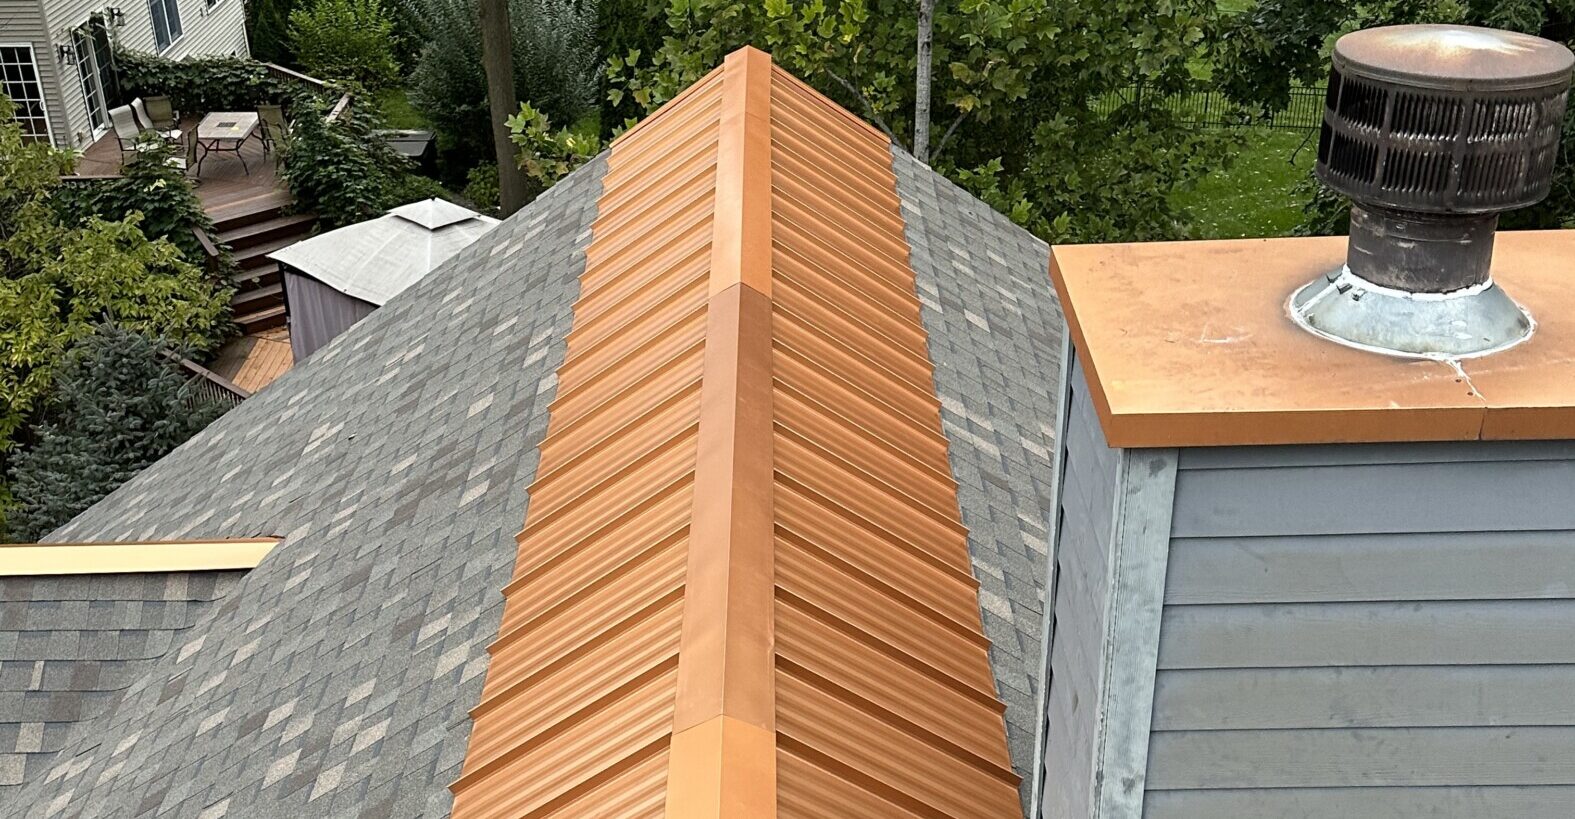 Copper ridge cap installed by Shingle and Metal Roofs